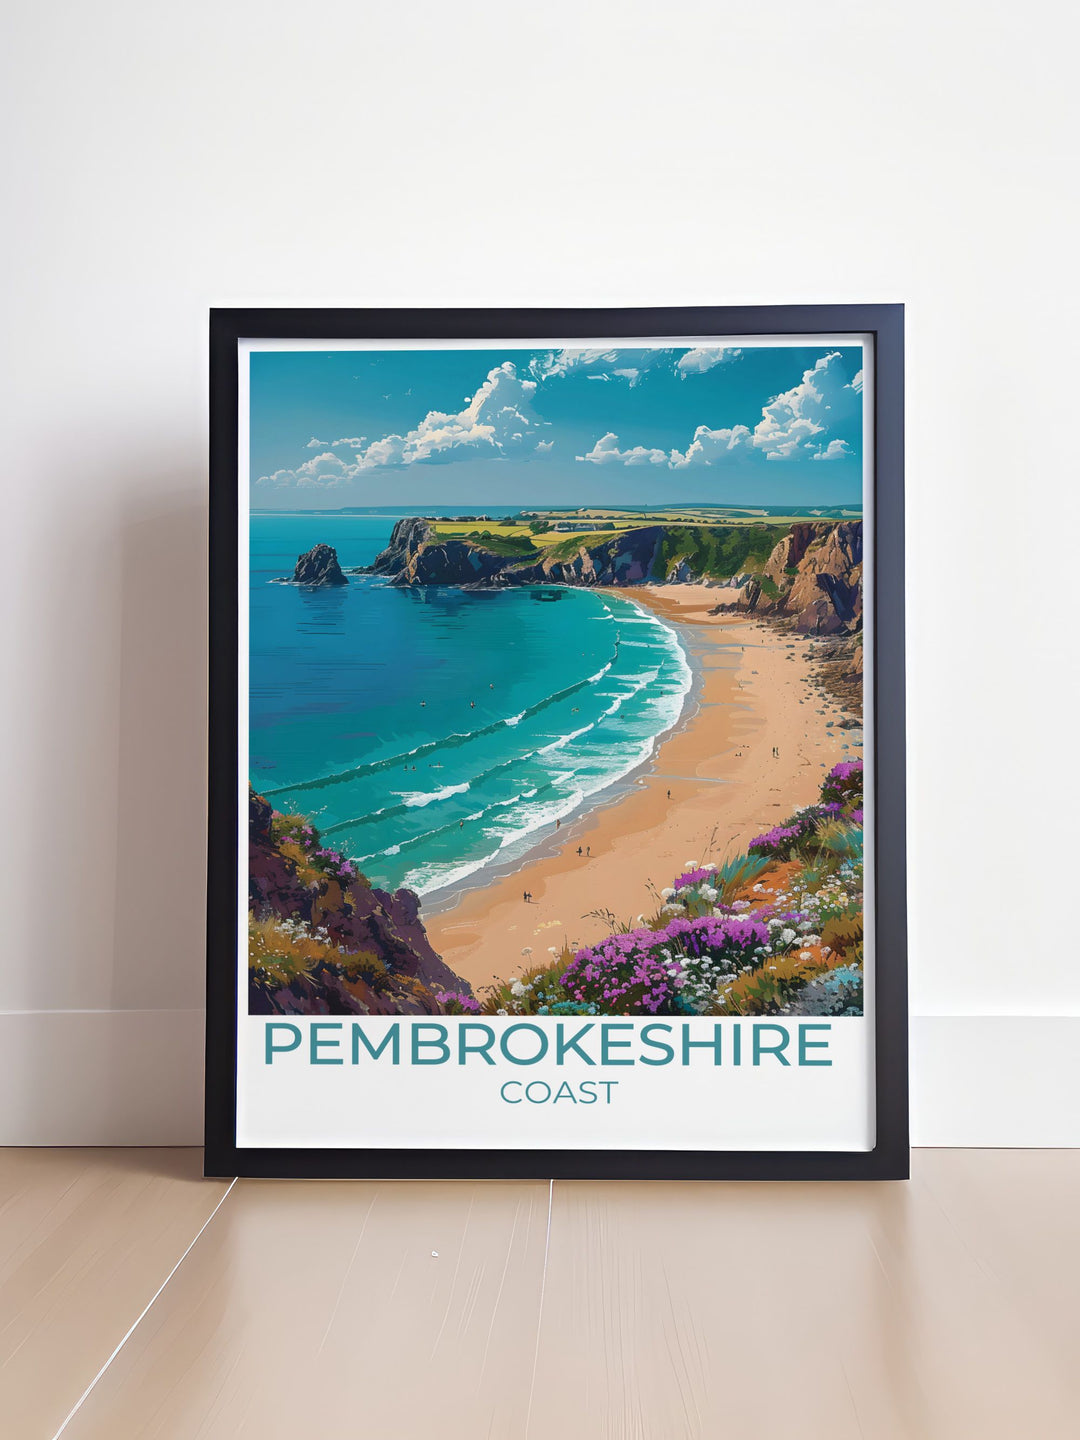 Retro travel poster of Barafundle Bay with an artistic depiction of the idyllic Welsh coastline blending modern artistry with classic design ideal for adding a touch of nostalgia and elegance to your home decor.